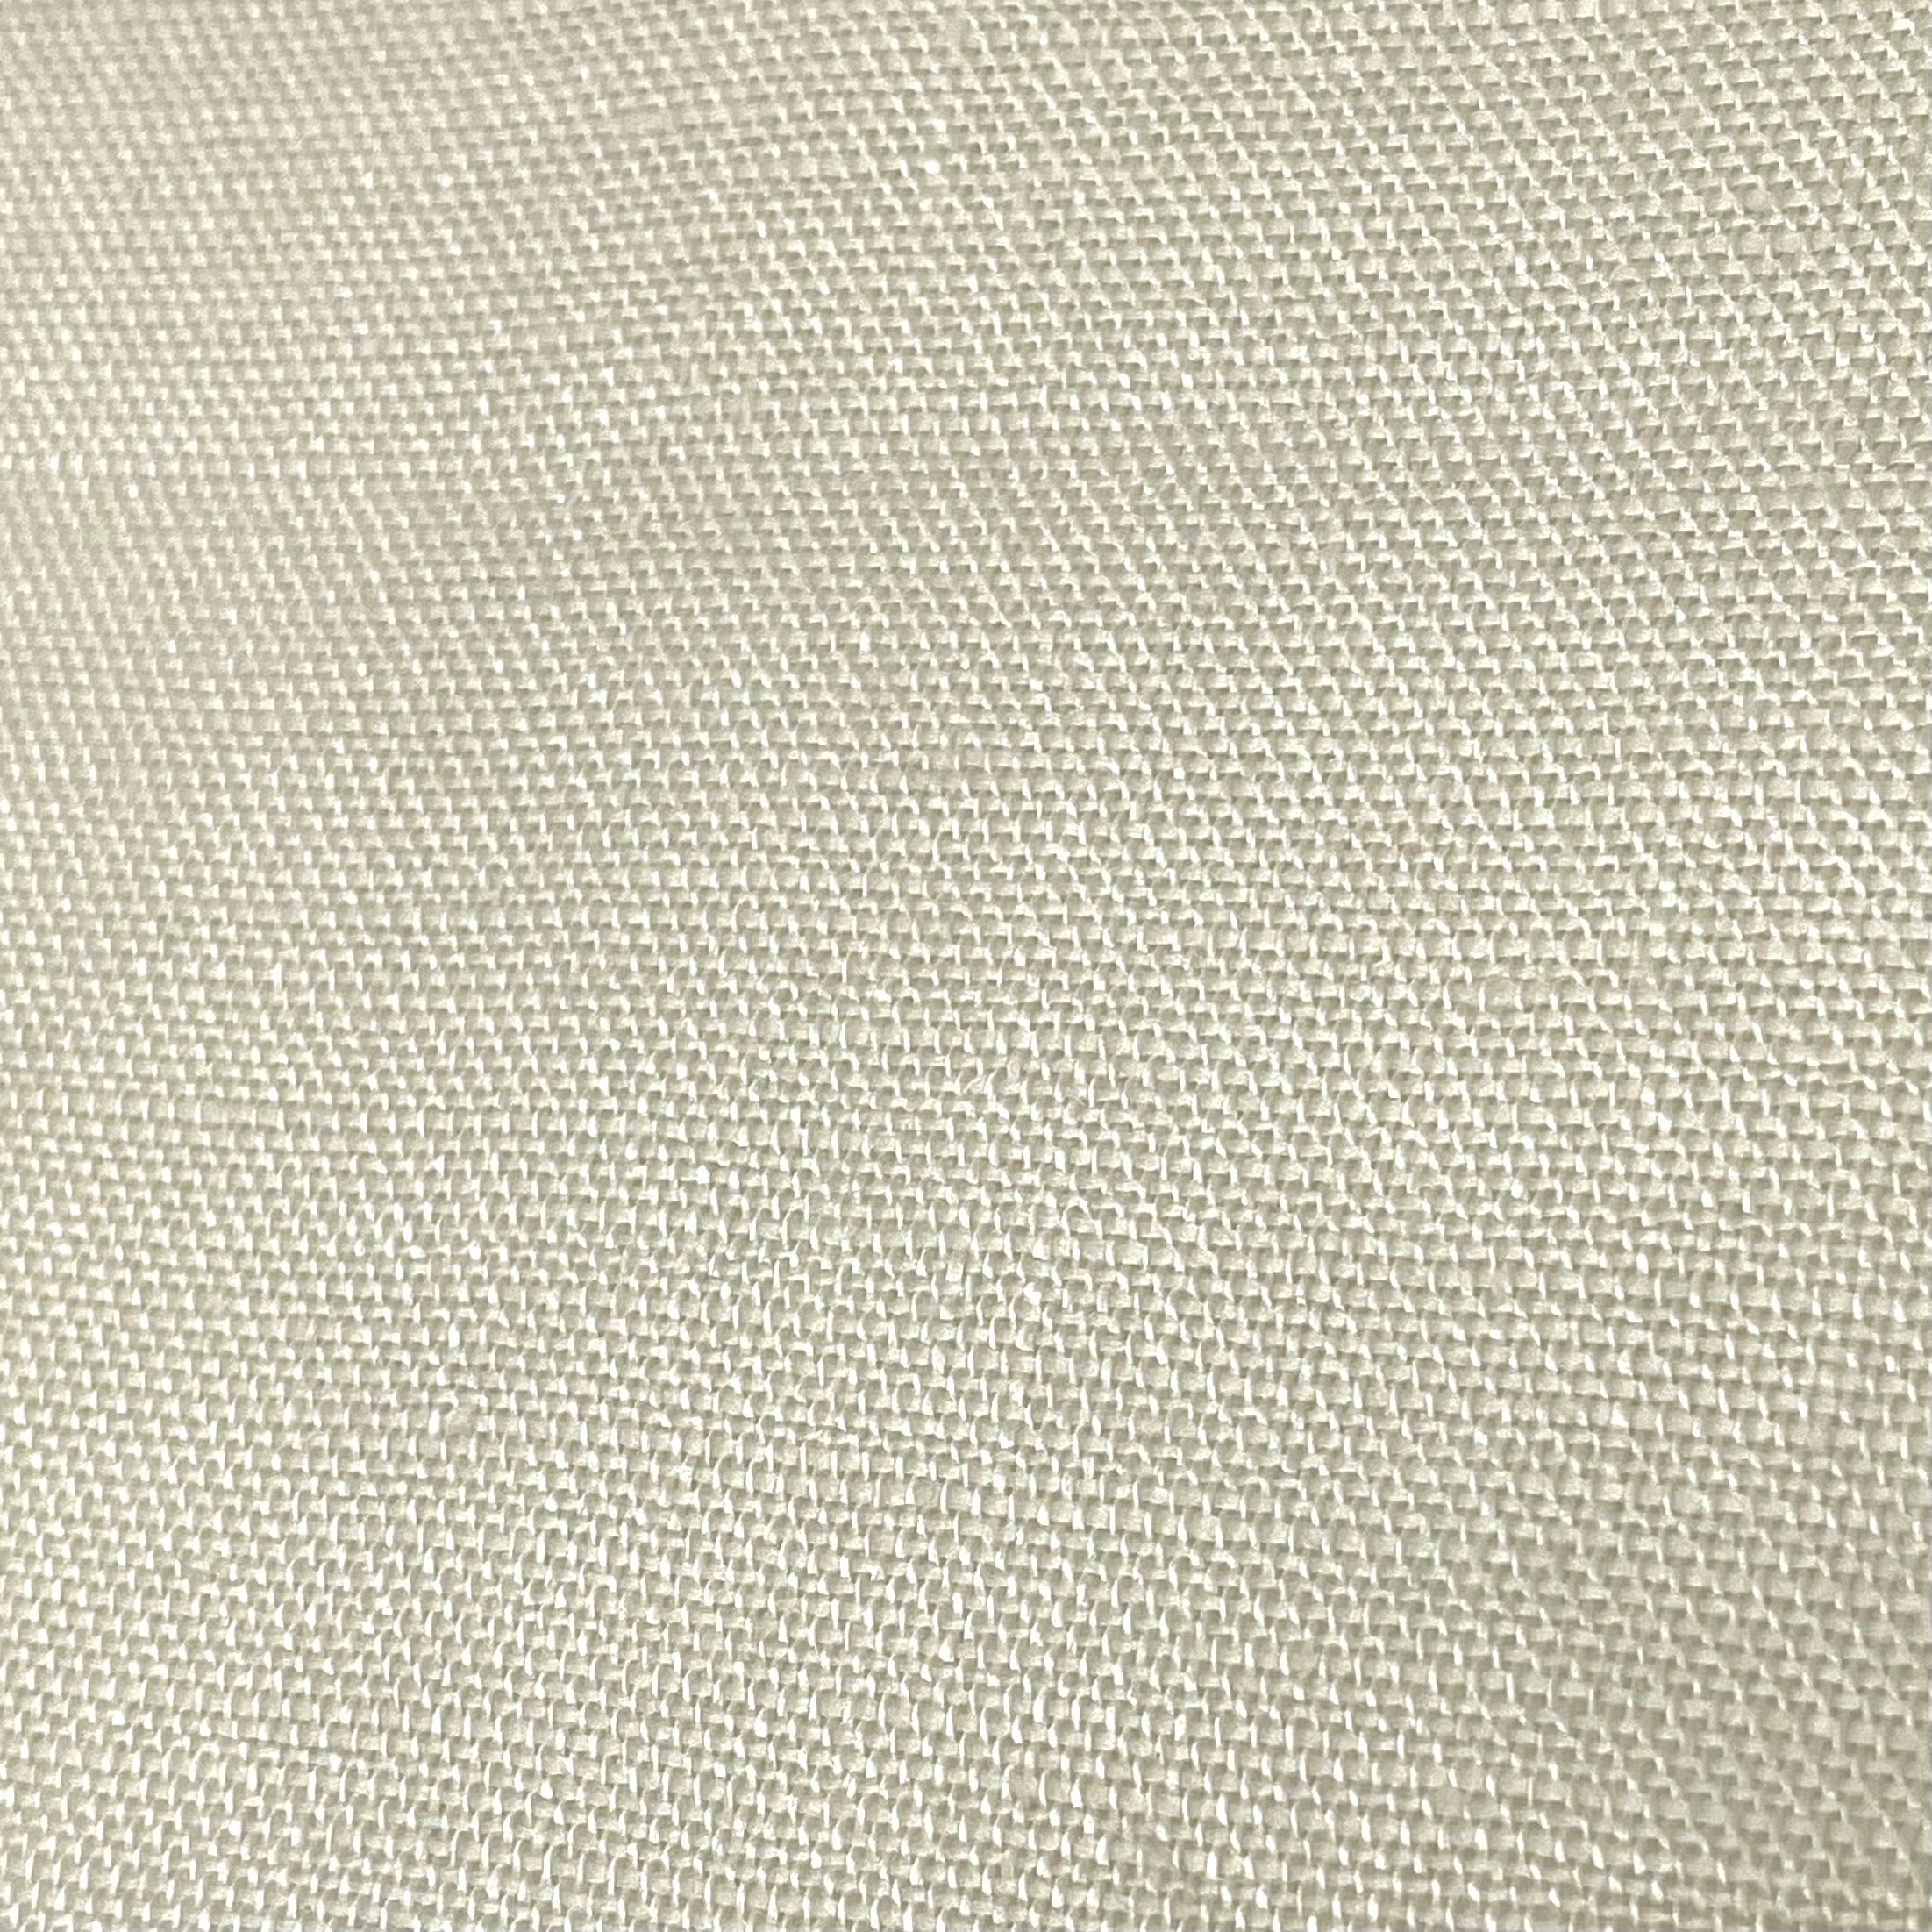 Textured 100% Natural Sheer Linen Fabric By The Yard, Curtain, Drapery, Table Top, 57" Width/CL1075